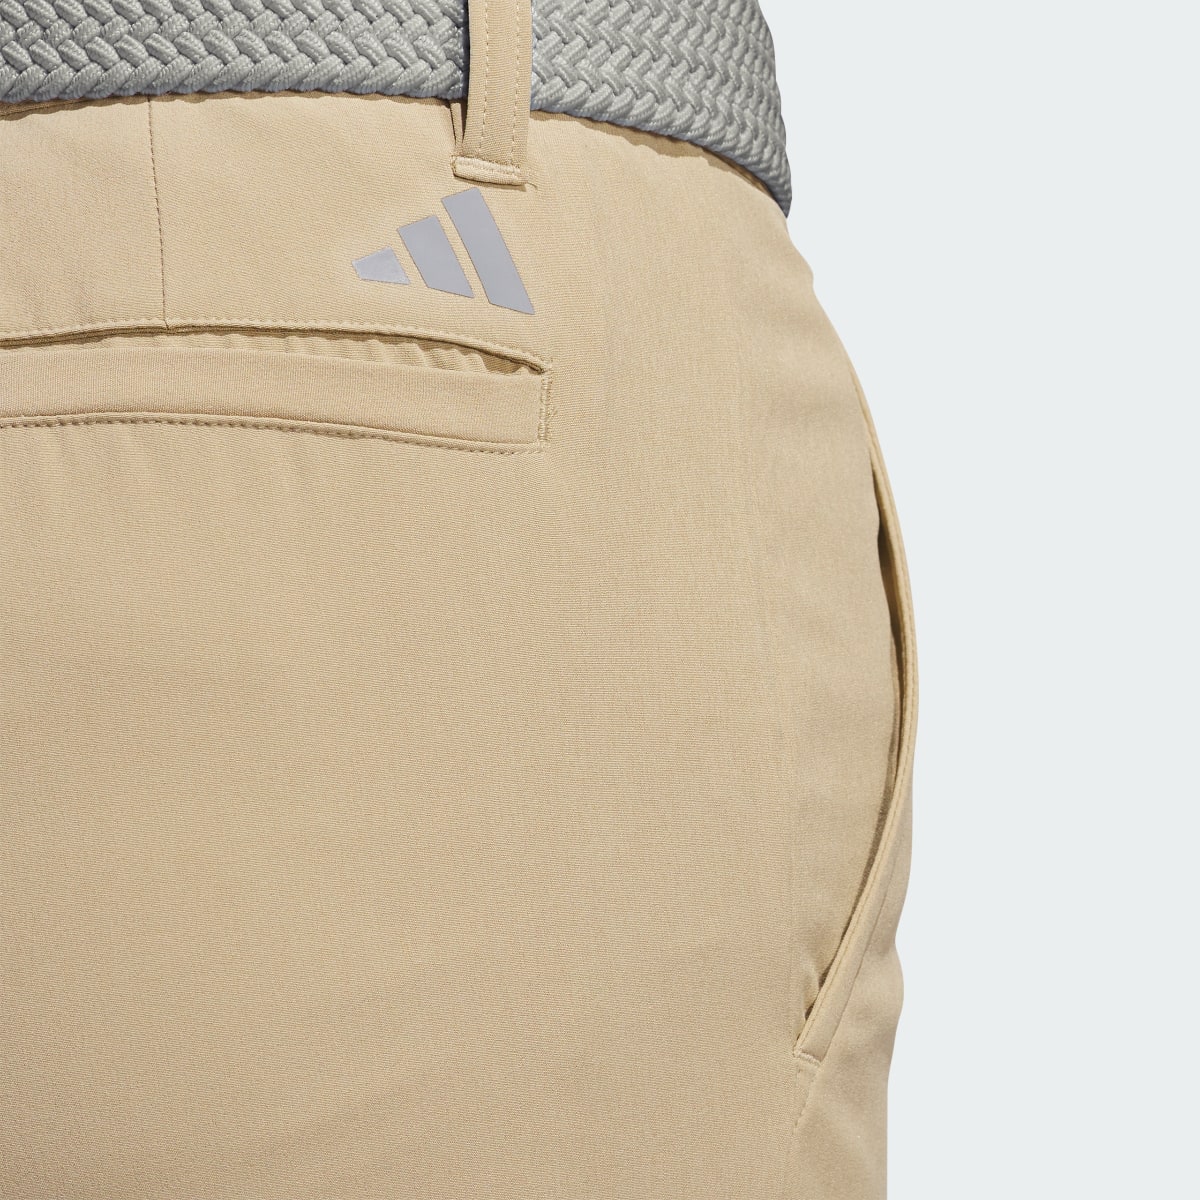 Adidas Ultimate365 Tapered Golf Pants. 5